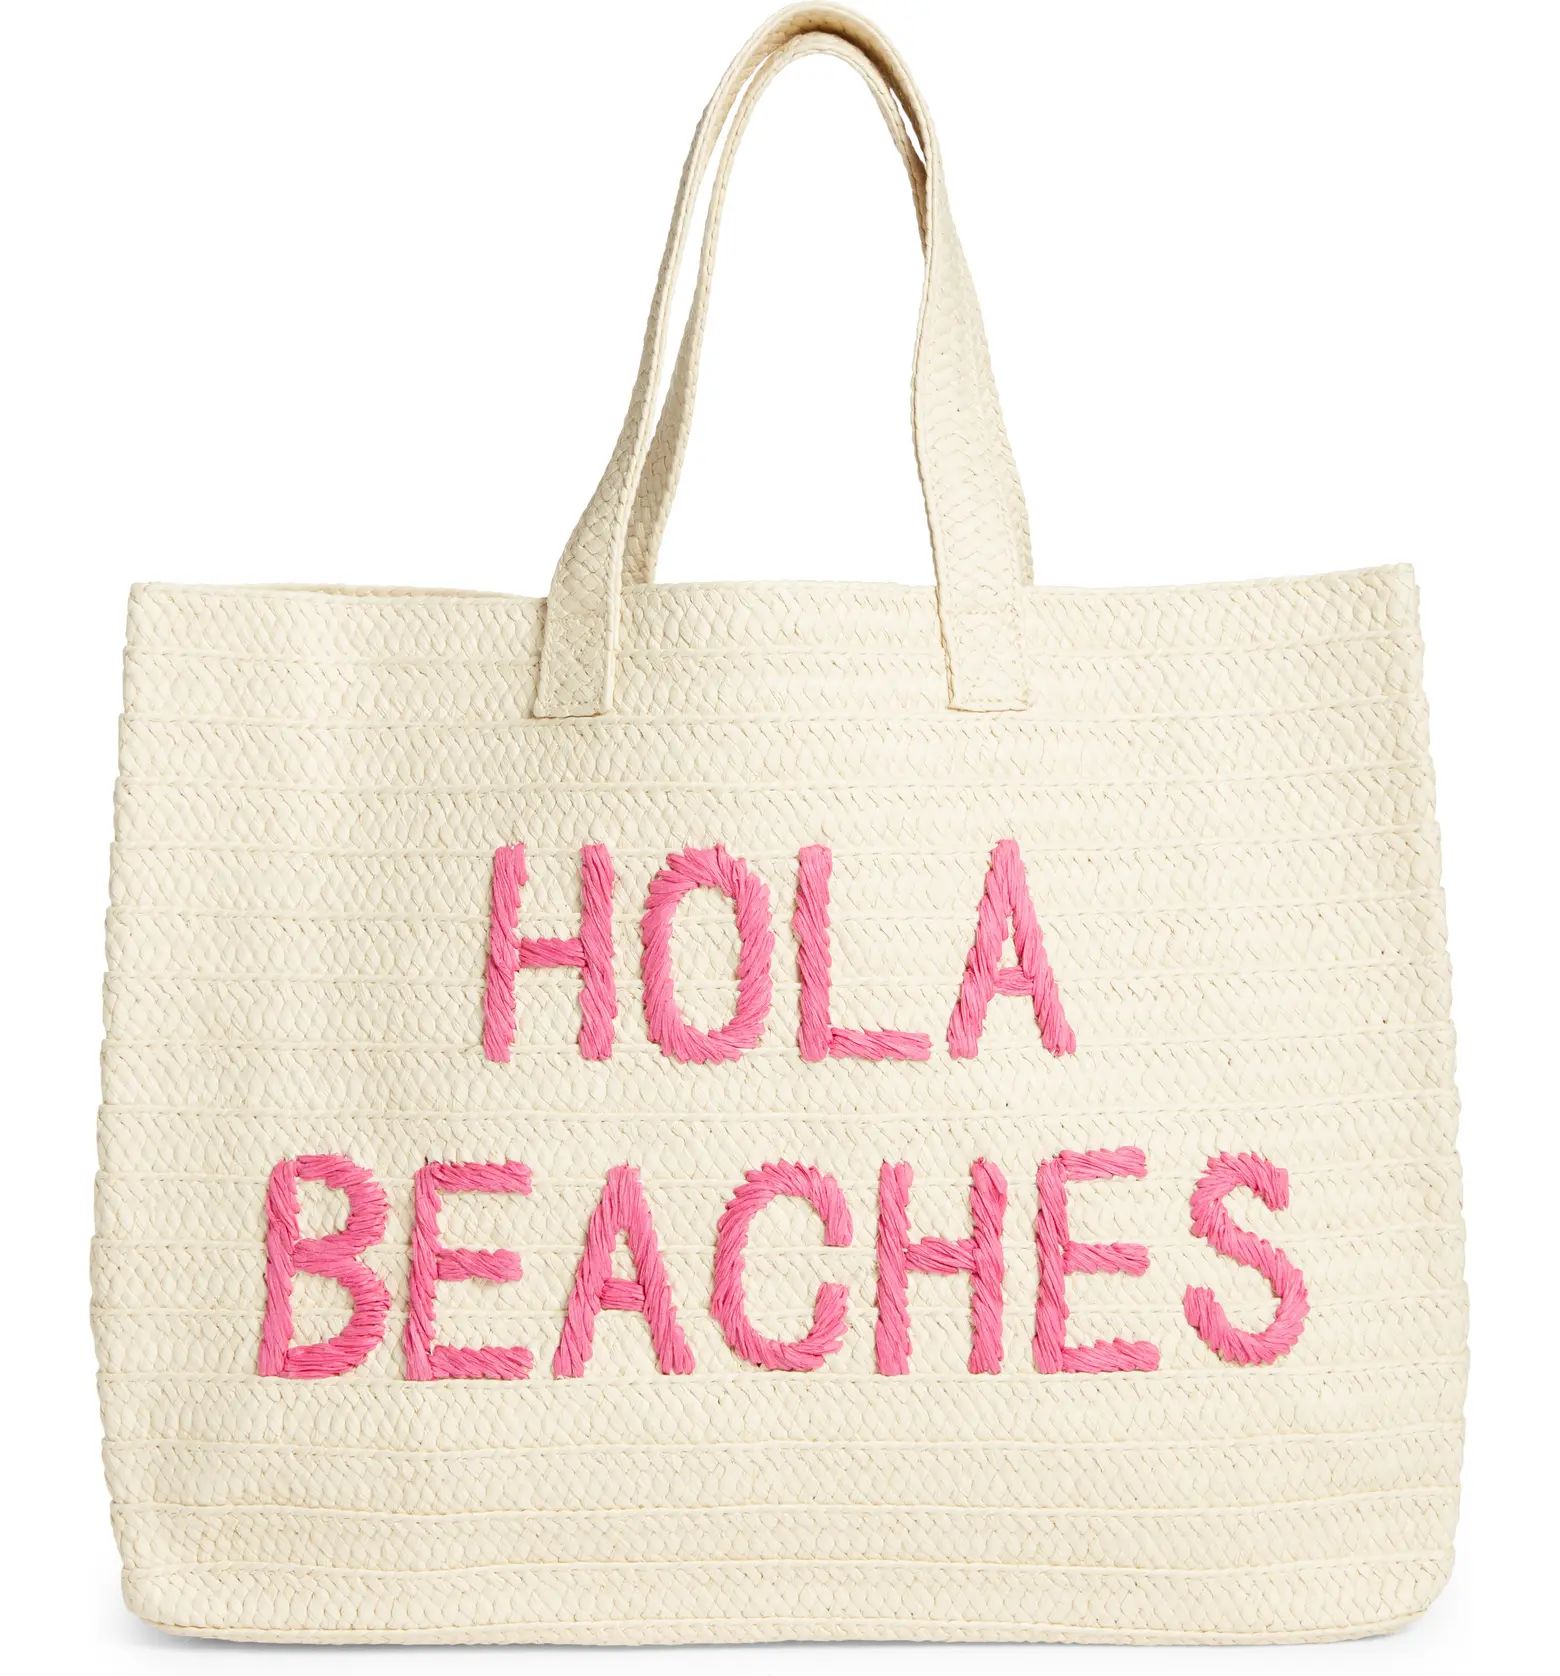 Hola Beaches Straw Tote | Nordstrom